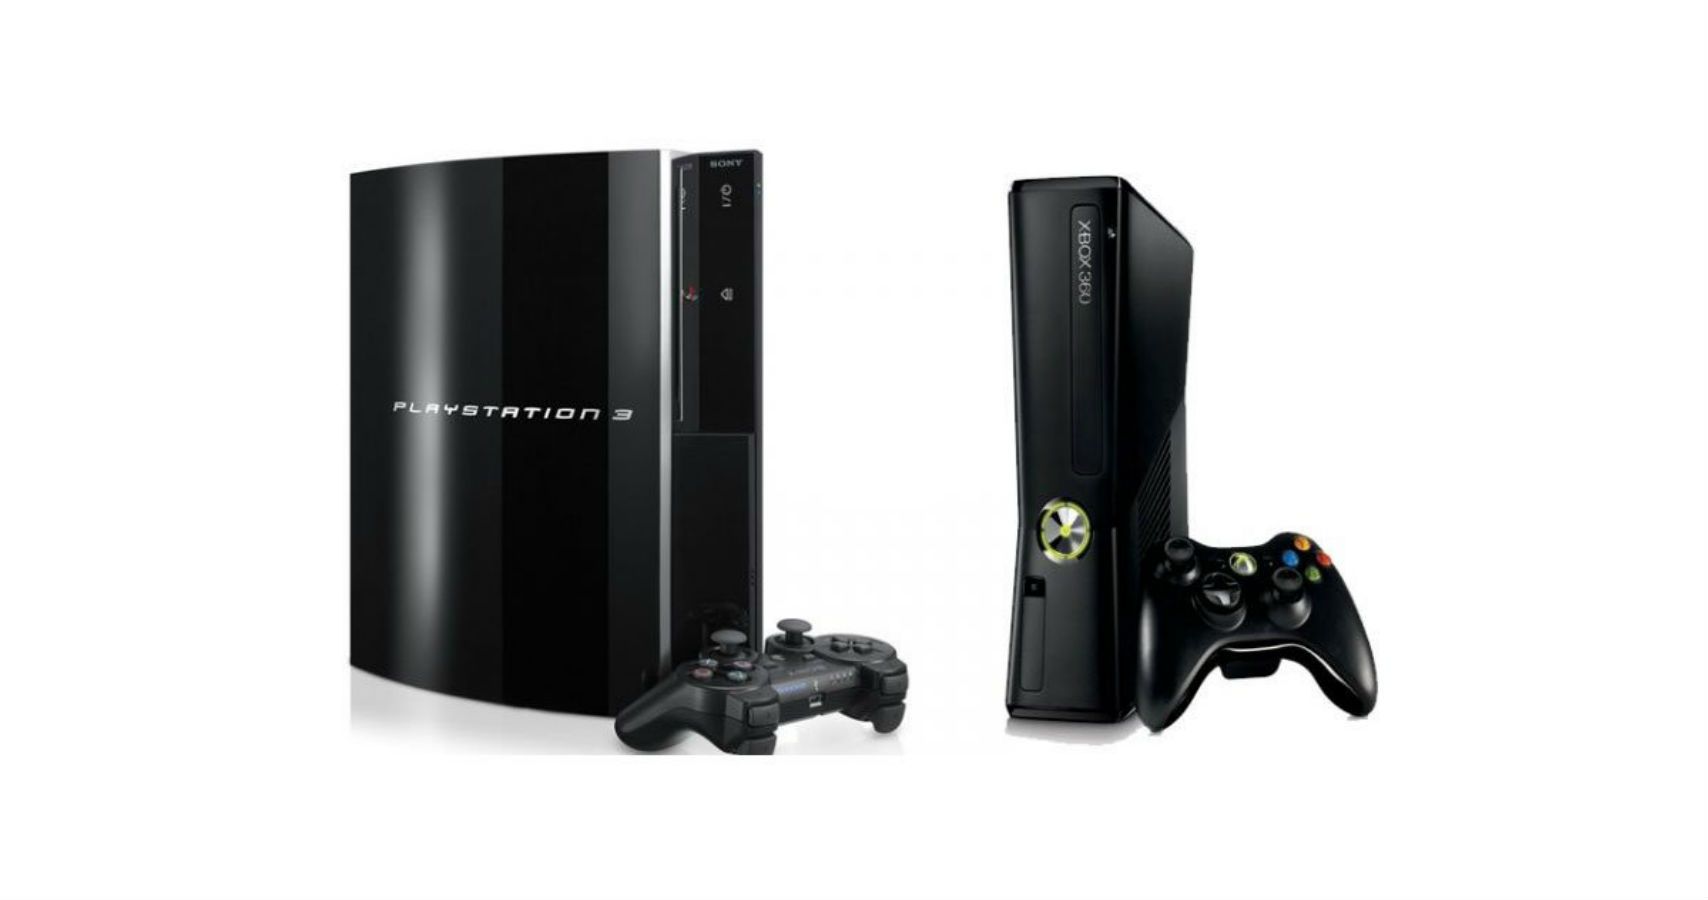 7th generation consoles